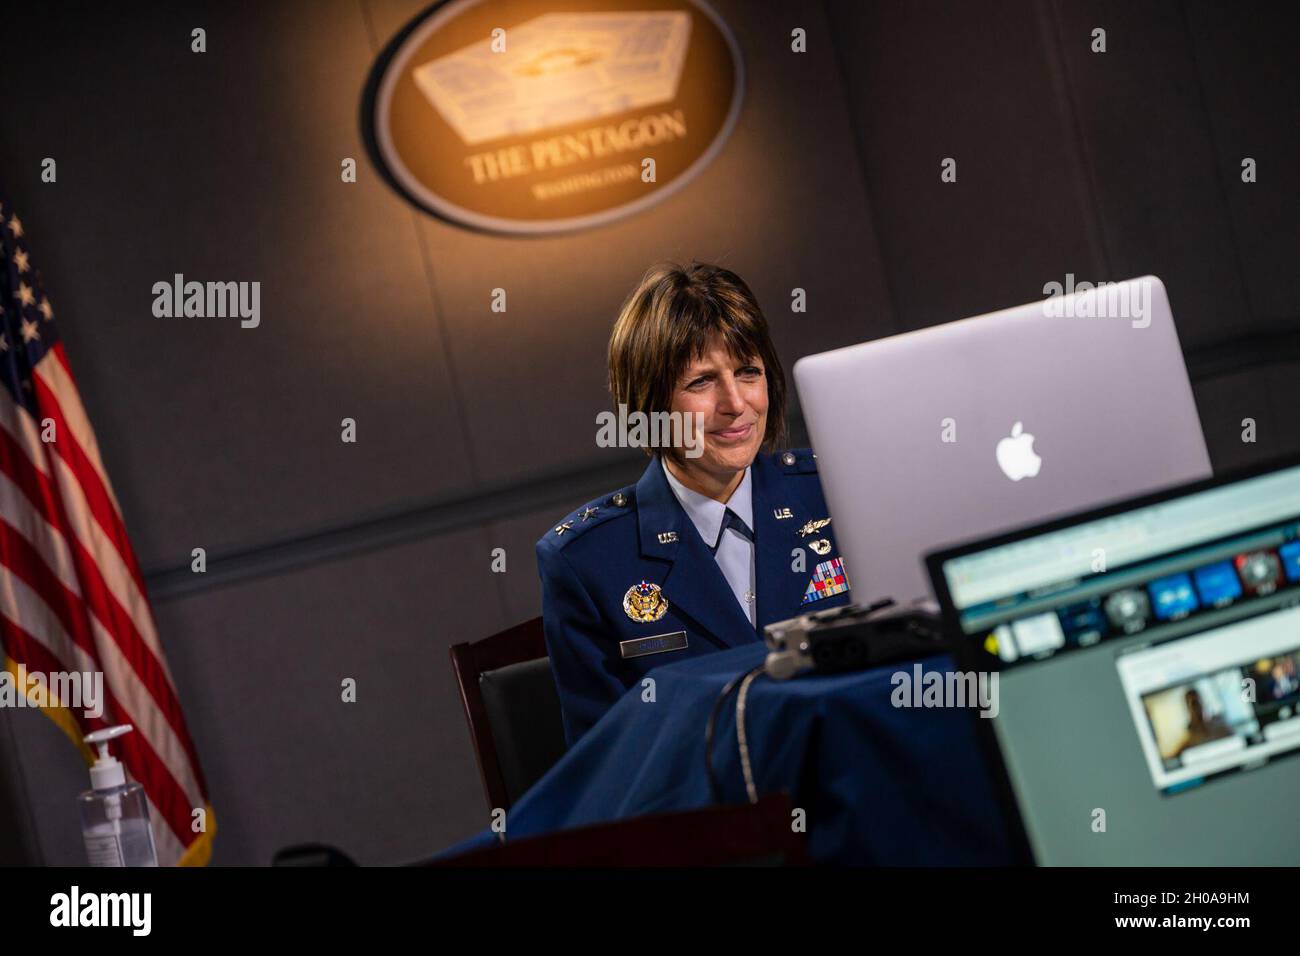 The Chief Technology and Innovation Officer for the U.S. Space Force, Maj. Gen. Kimberly A. Crider, delivers remarks virtually to the Potomac Officer’s Club 5G Summit, the Pentagon, Washington, D.C., Jan. 7, 2021. Stock Photo